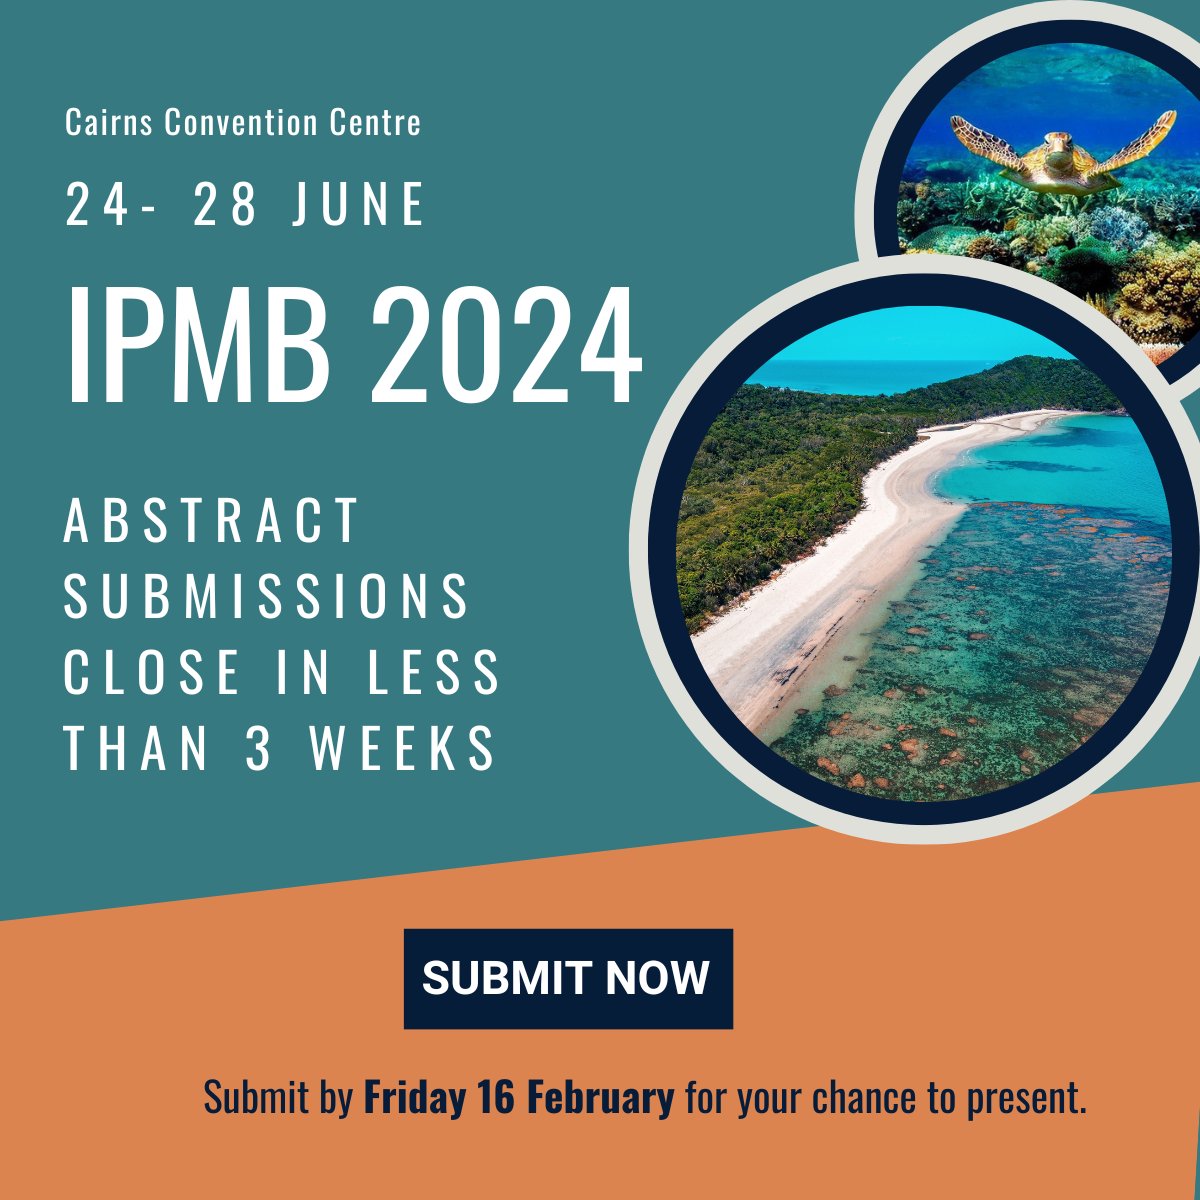 #IPMB2024 Cairns, Australia: abstracts close 16 February! Earlybird registration open until 21 March. ECR travel grants available: ipmb2024.org/abstracts